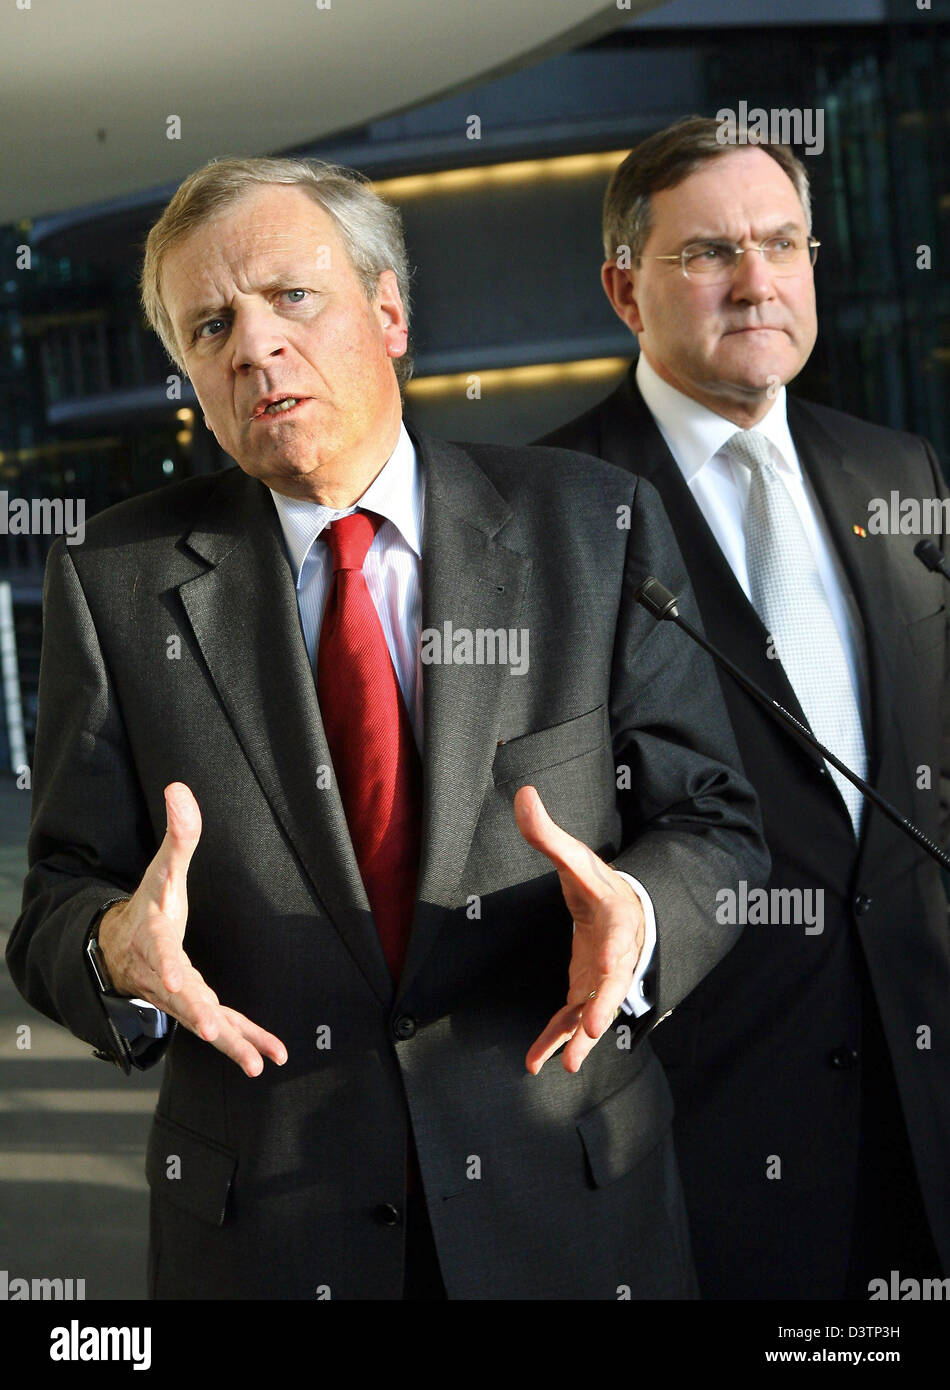 Minister of Defence Franz Josef Jung (R, CDU) and NATO secretary general Jaap de Hoop Scheffer give a statement to the press in Berlin, Germany, Wednesday, 25 October 2006. Jung and de Hoop Scheffer talked about the topics of the upcoming NATO summit in Riga, Latvia. Photo: Steffen Kugler Stock Photo